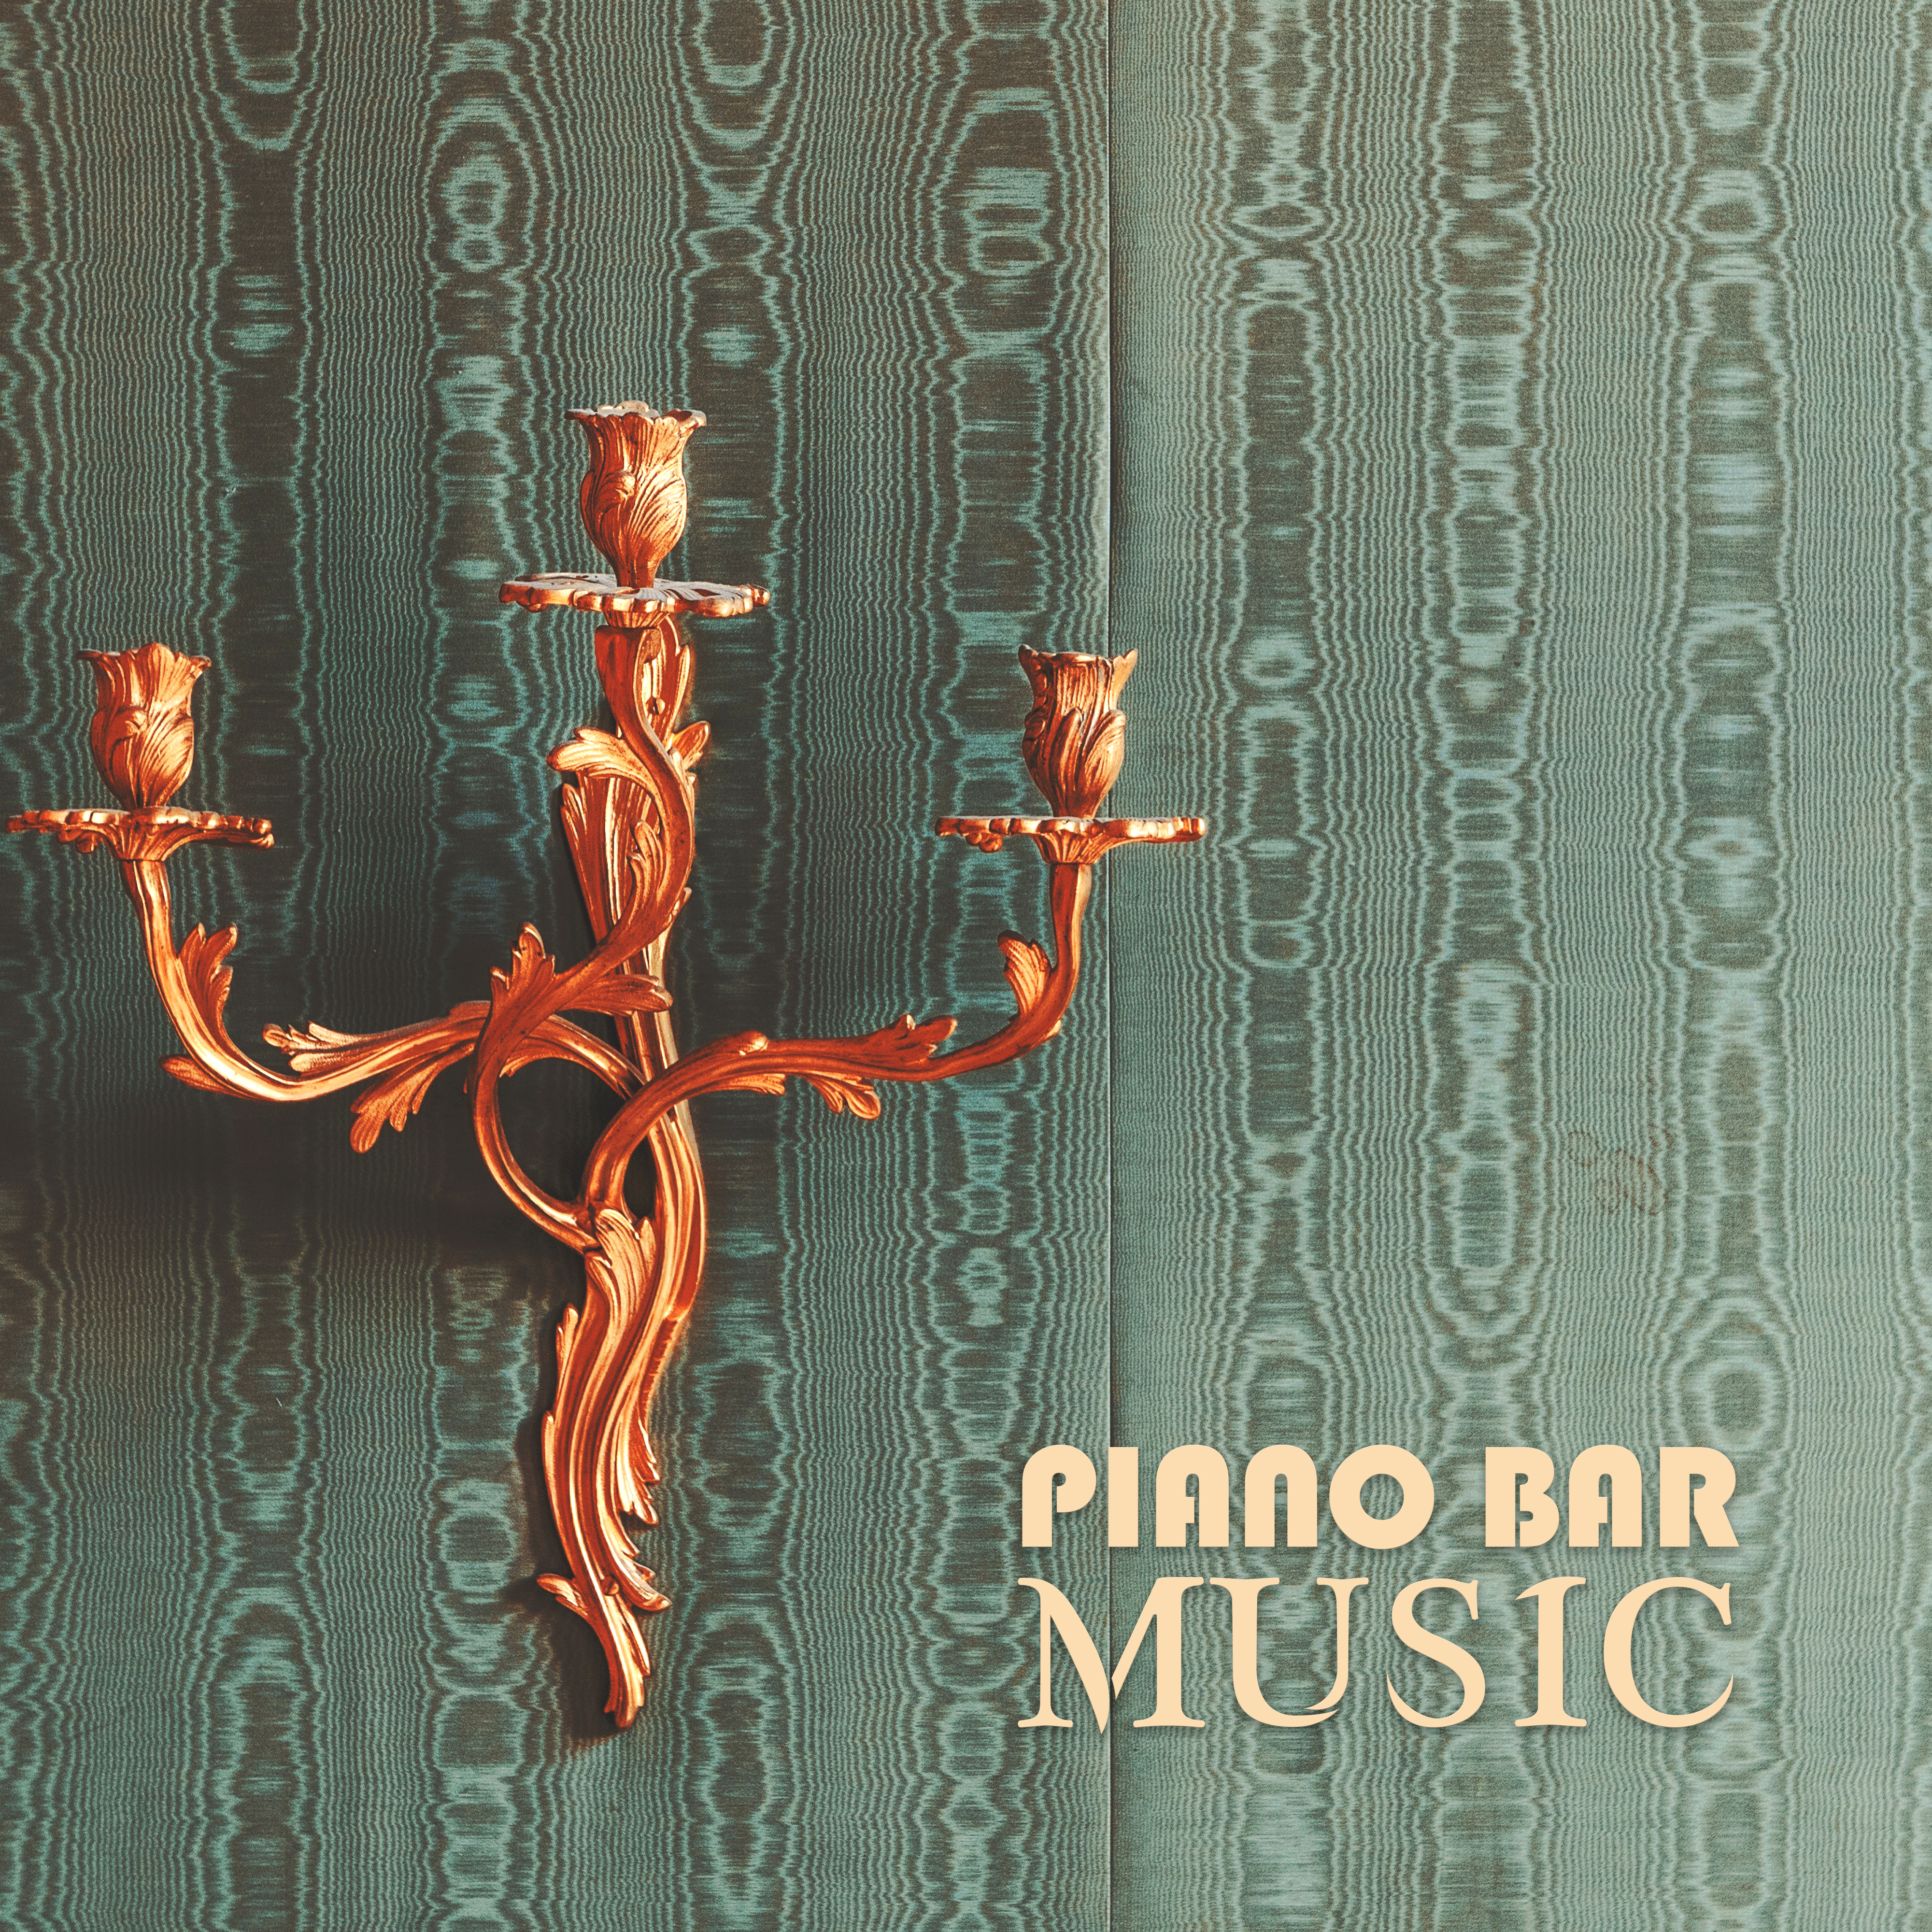 Piano Bar Music – Smooth Jazz for Relaxation, Jazz Vibes, Coffee Talk, Restaurant Jazz, Gentle Piano